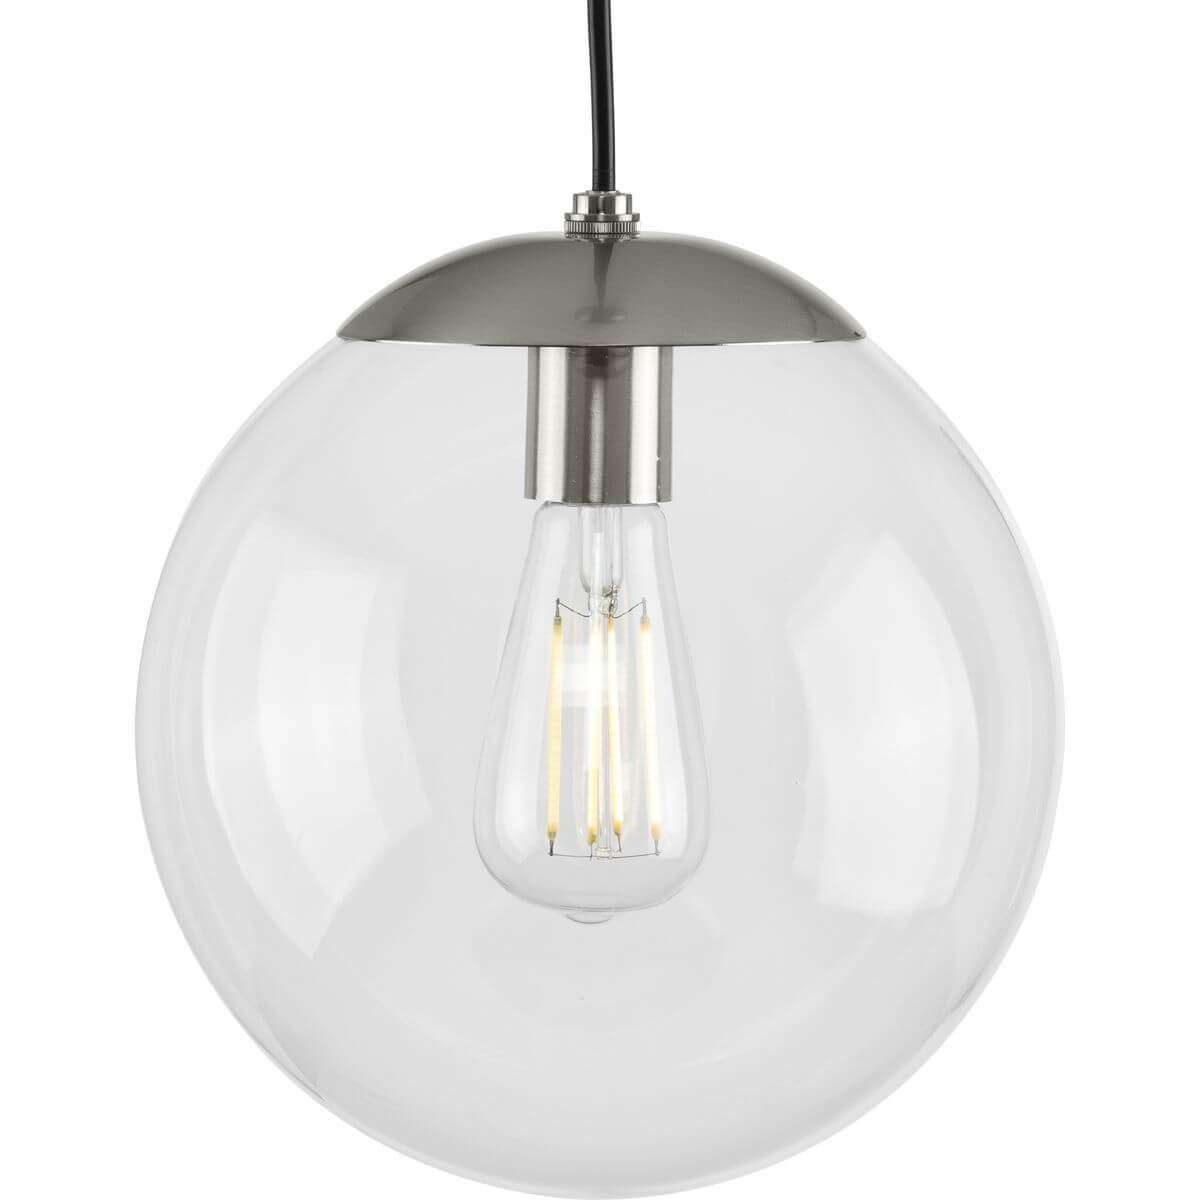 Progress Lighting Atwell 1 Light 10 inch Pendant in Brushed Nickel with Clear Glass P500310-009